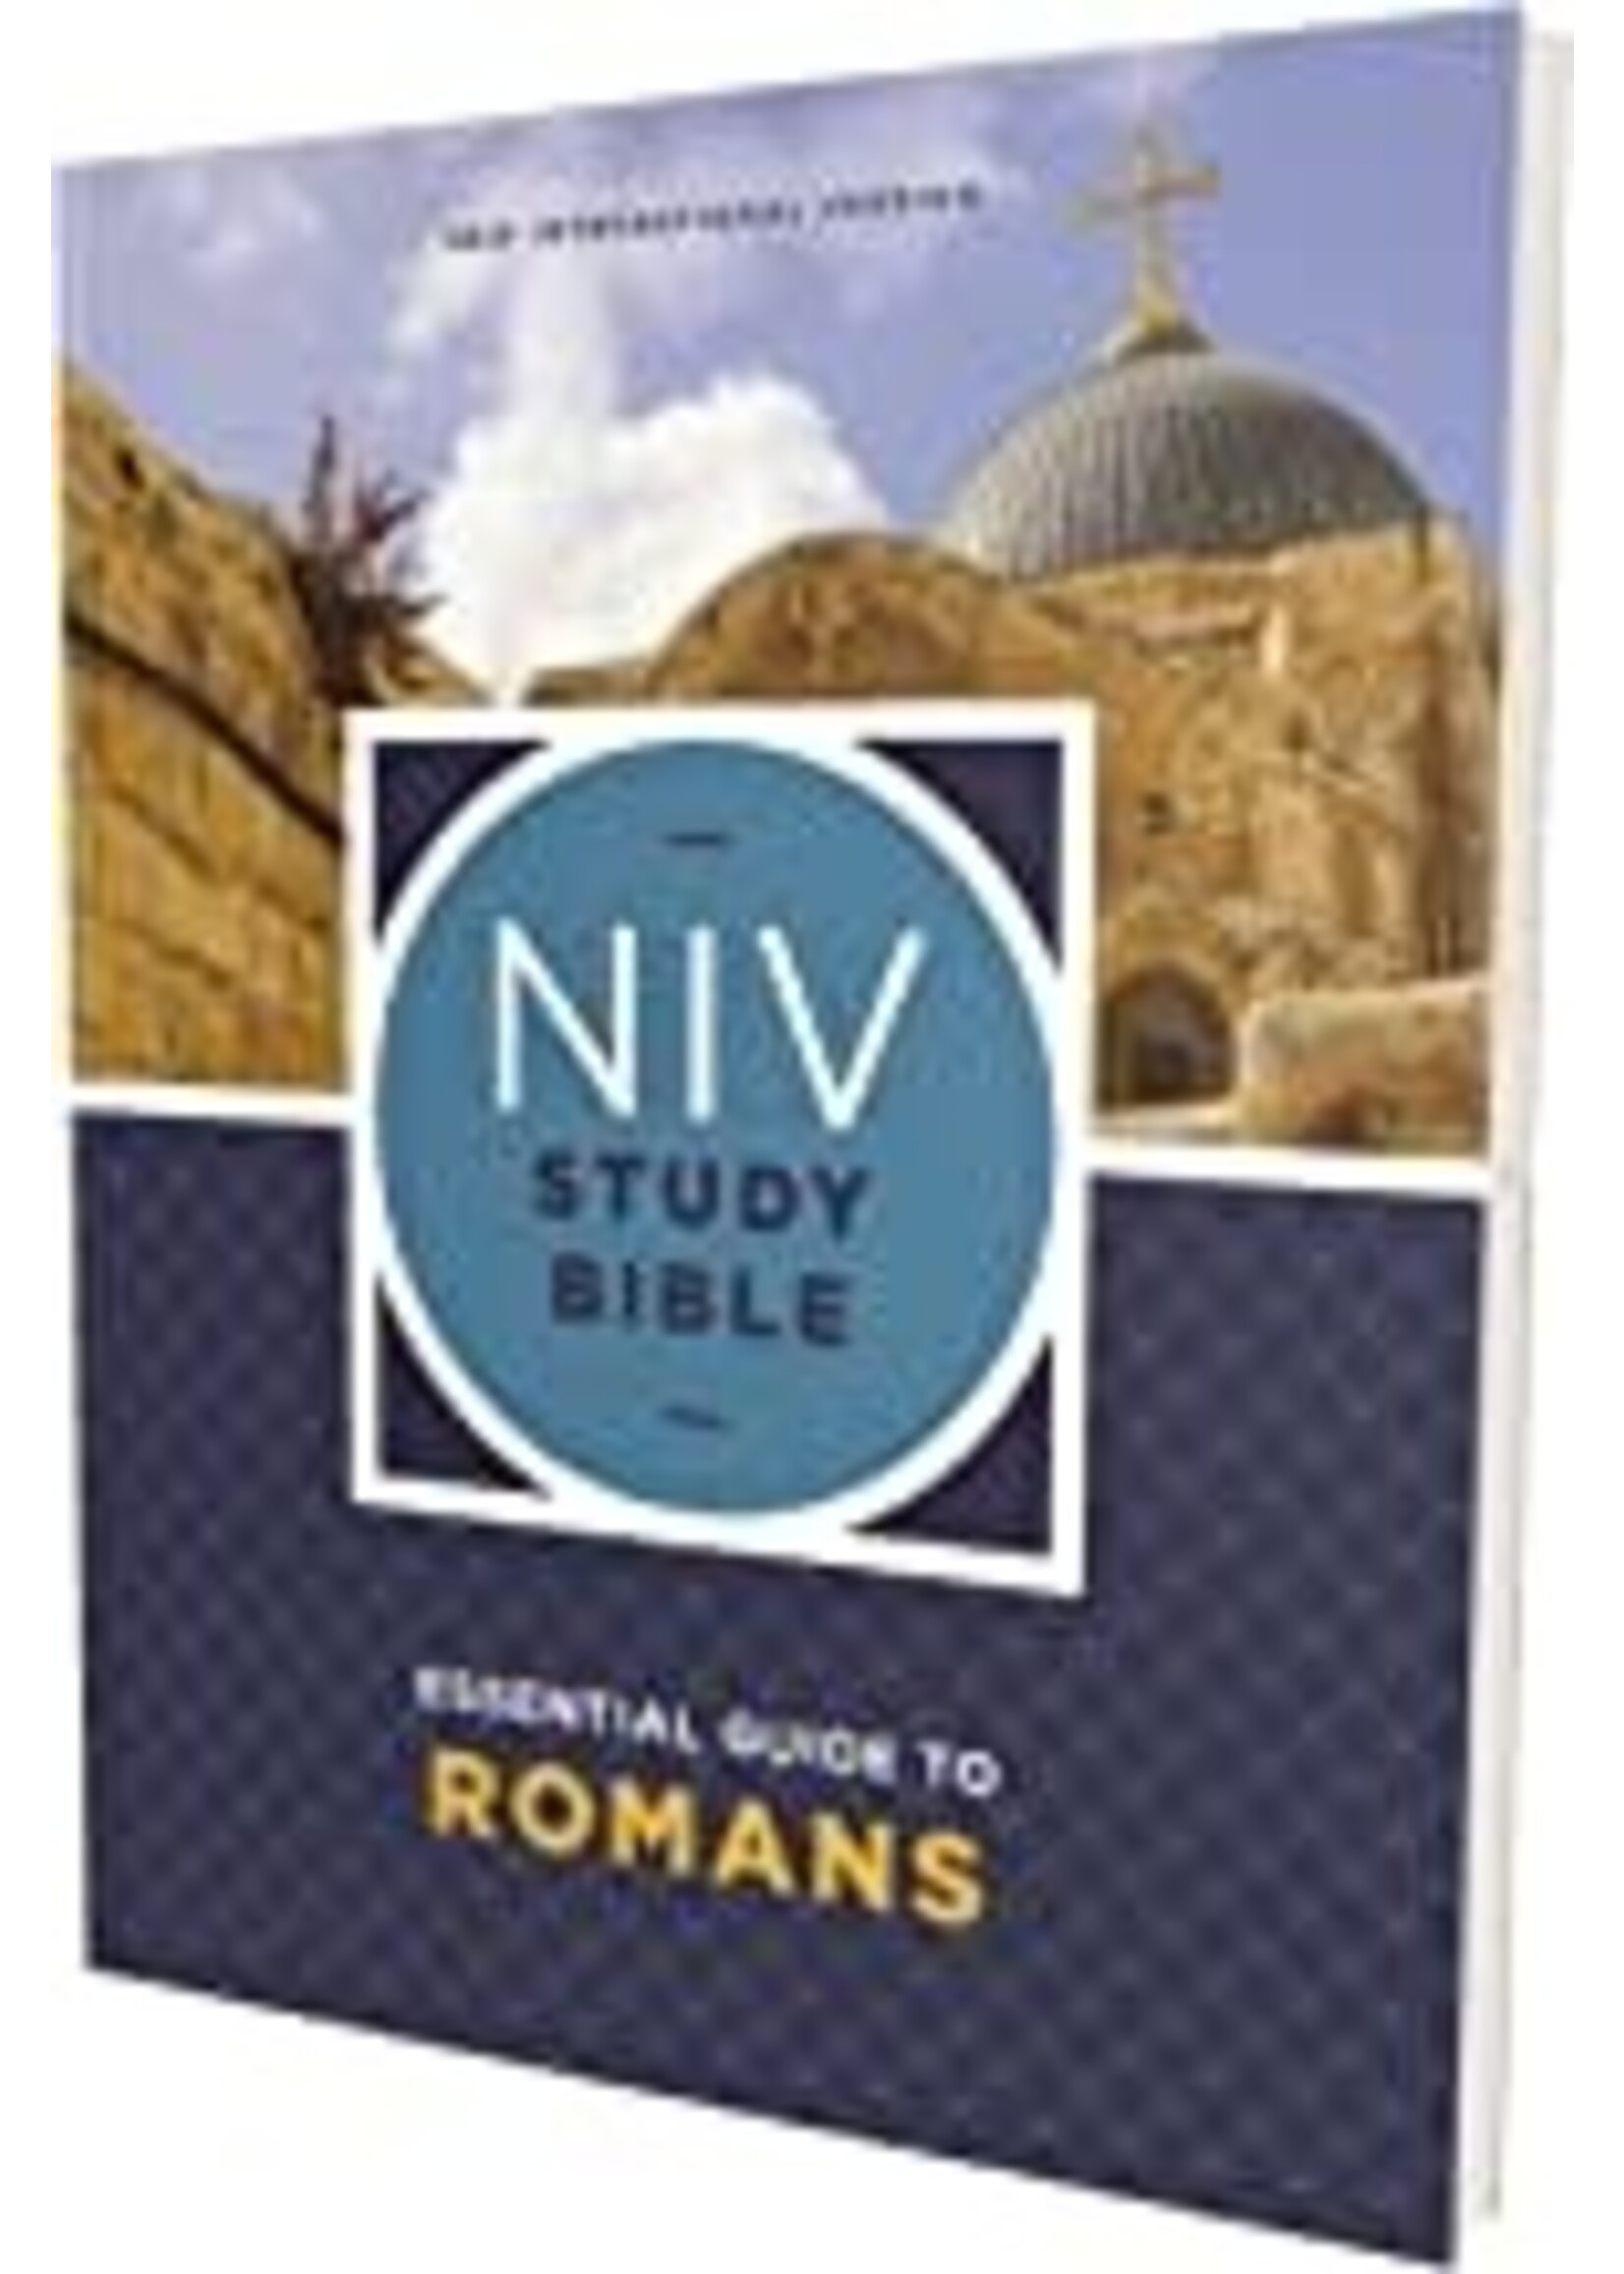 NIV Study Bible Essential Guide to Romans, Paperback